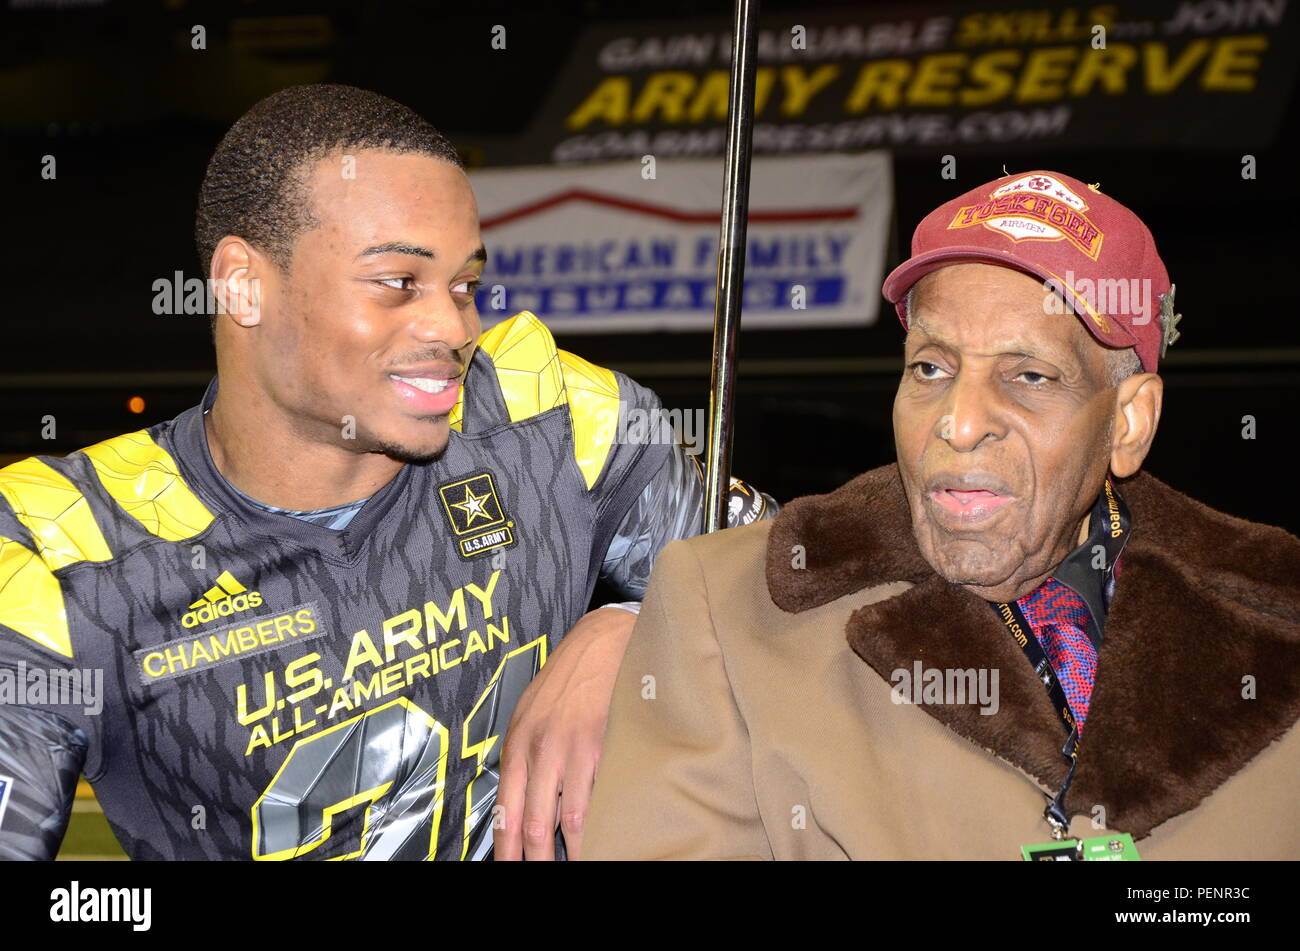 Cameron Chambers (left), East Team player for the 2016 All-American Bowl, and Dr. Granville Coggs (right), a surviving Tuskegee Airmen, meet before the 2016 All-American Bowl, Jan. 9. Chambers great uncle Wesley C. Walker was a Tuskegee Airmen who entered the Lonely Eagle Chapter in 2005 at the age of 85. During the pregame ceremonies, Coggs and fellow Tuskegee Airmen, Theodore Johnson, were introduced to the crowd at midfield. The AAB is U.S. Army sponsored bowl game that features the top 90 high school football players in the Nation. Stock Photo